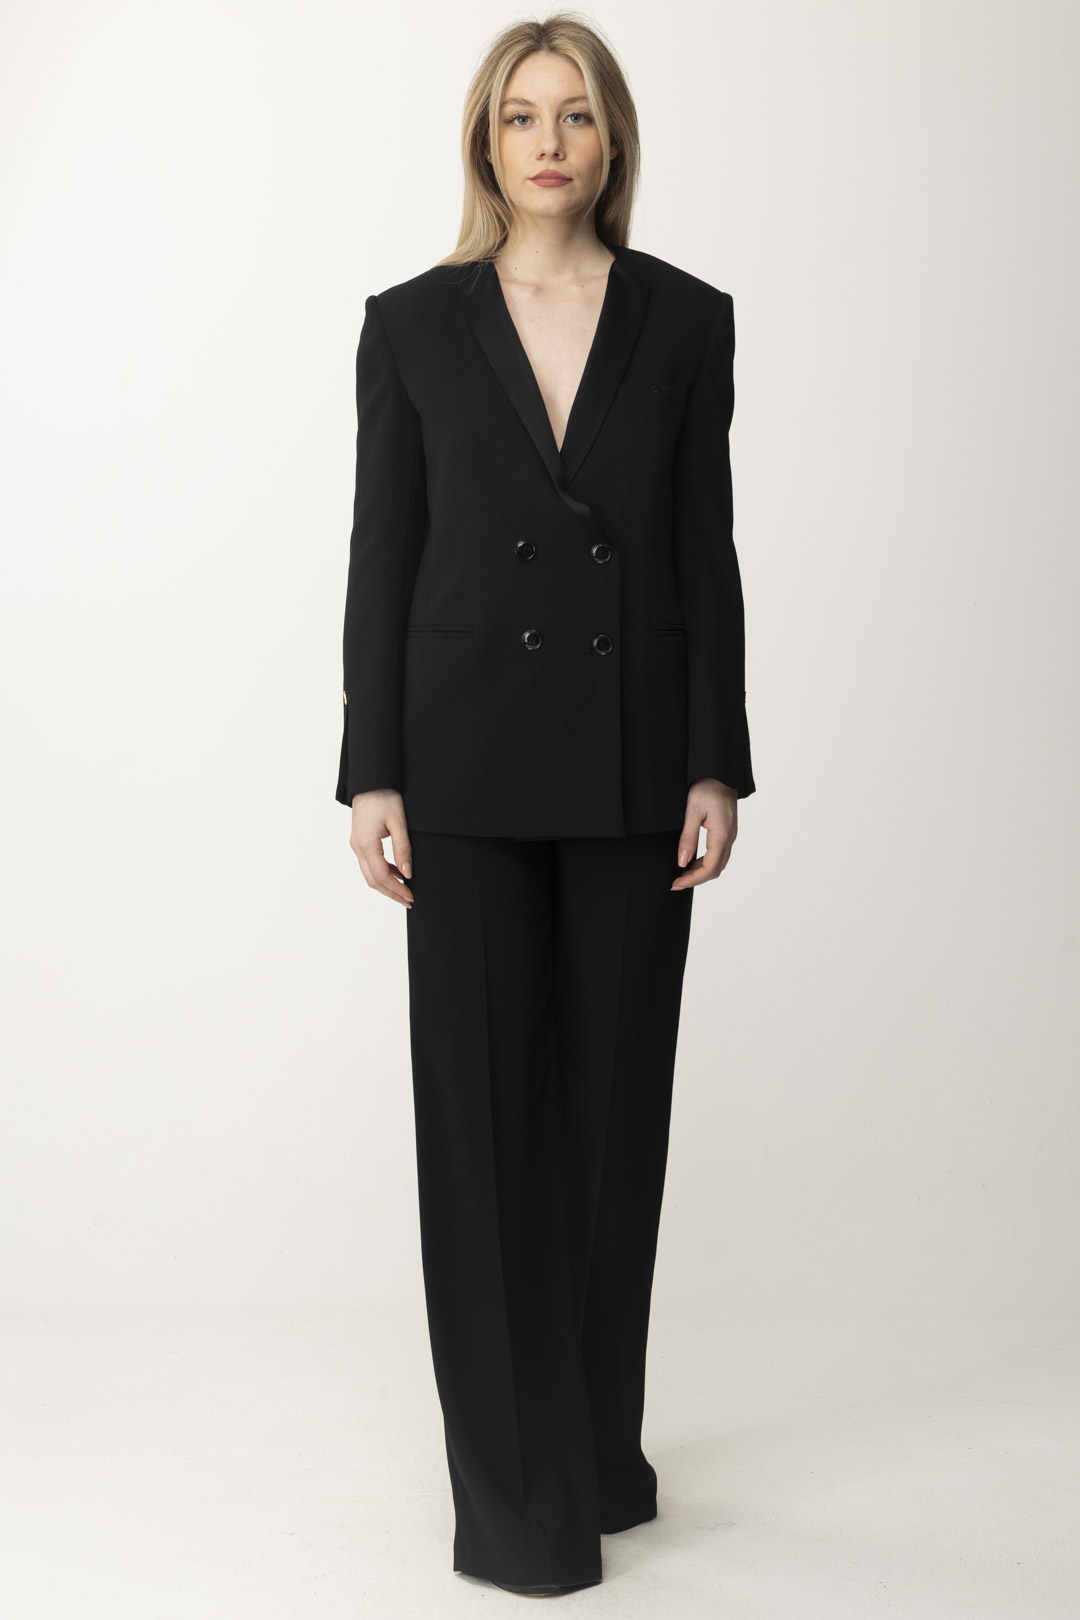 Preview: Elisabetta Franchi Double-Breasted Jacket with Satin Lapels Nero